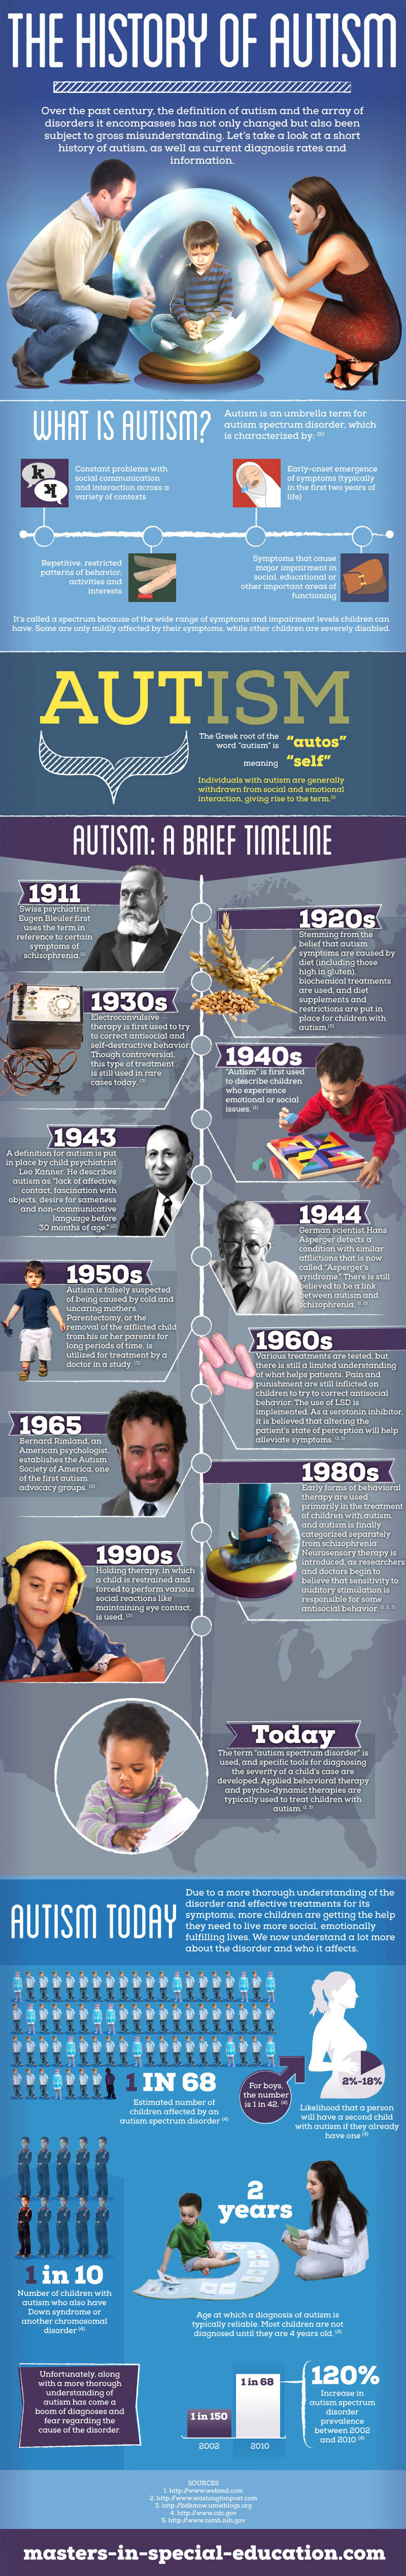 History of Autism - Mental Disorder Infographic